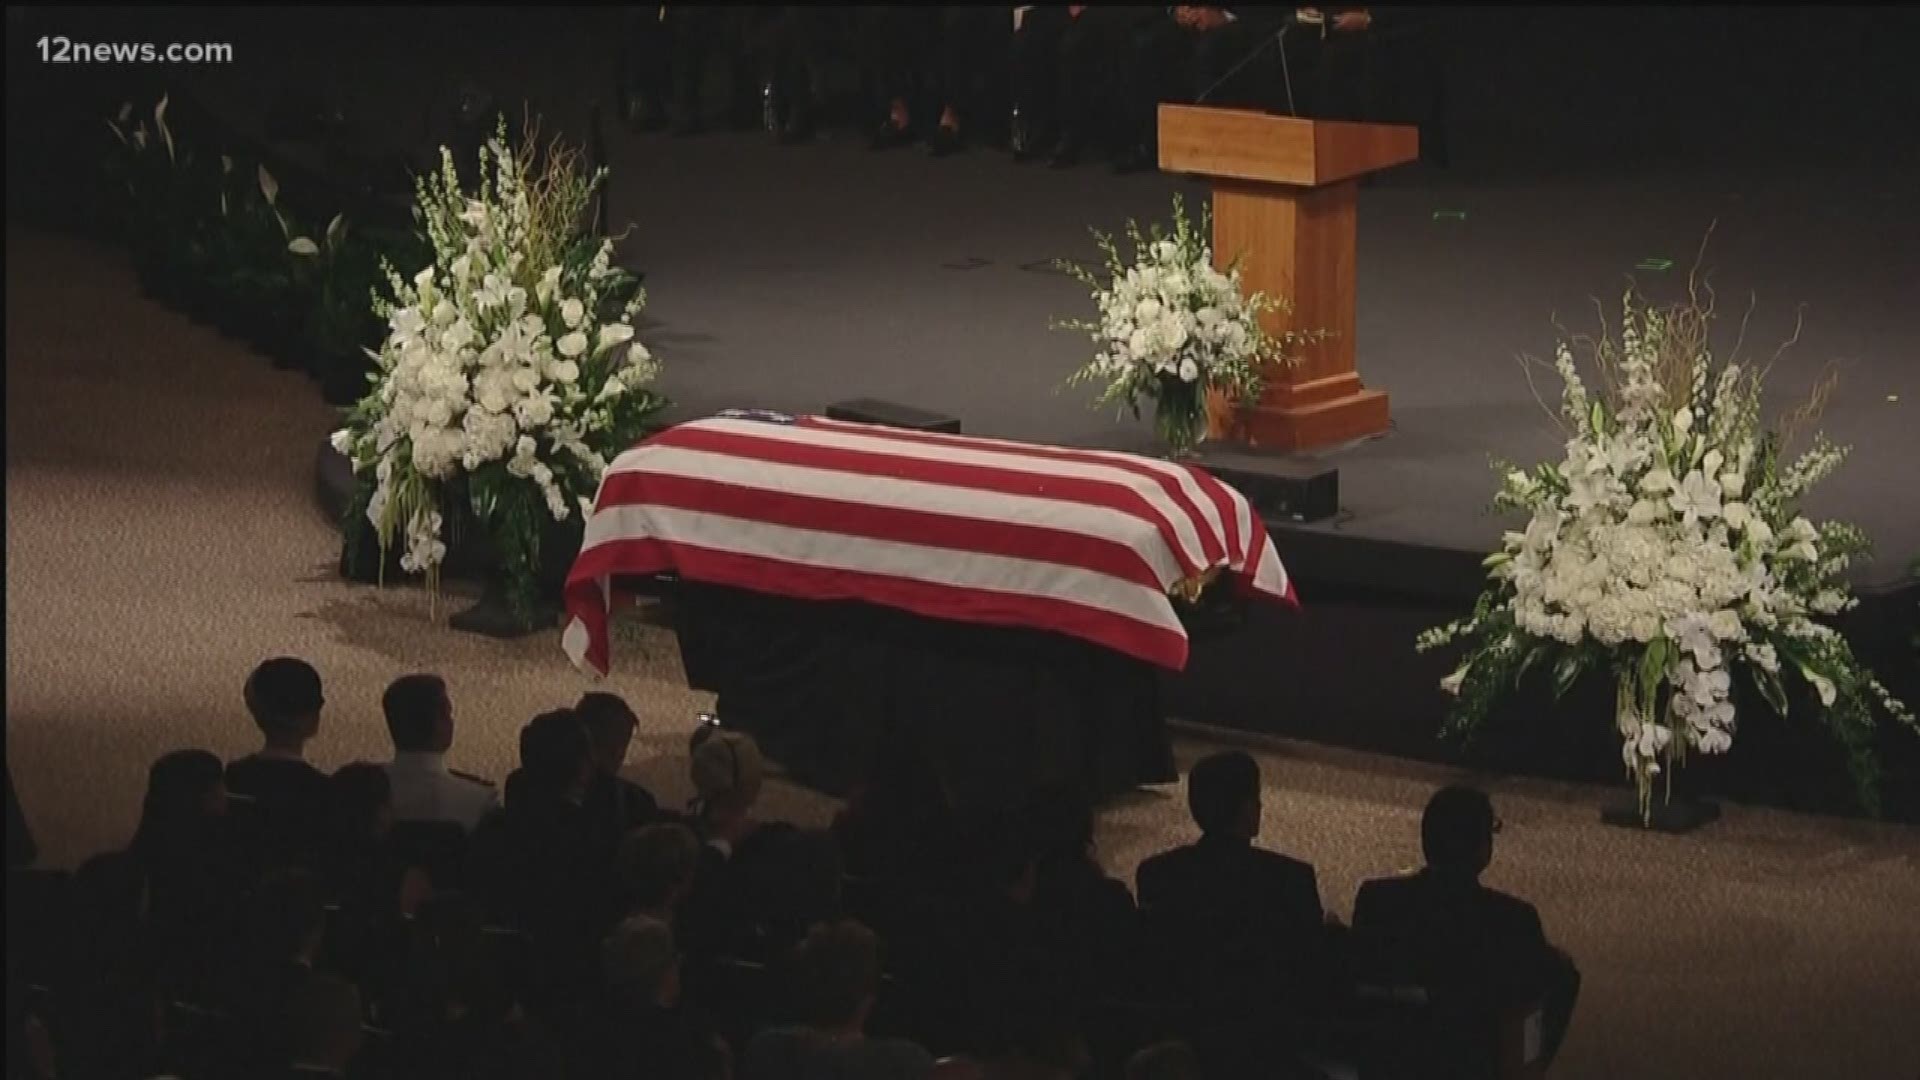 The life and legacy of Senator John McCain was honored today by those who knew him best and the community that he served for over three decades.